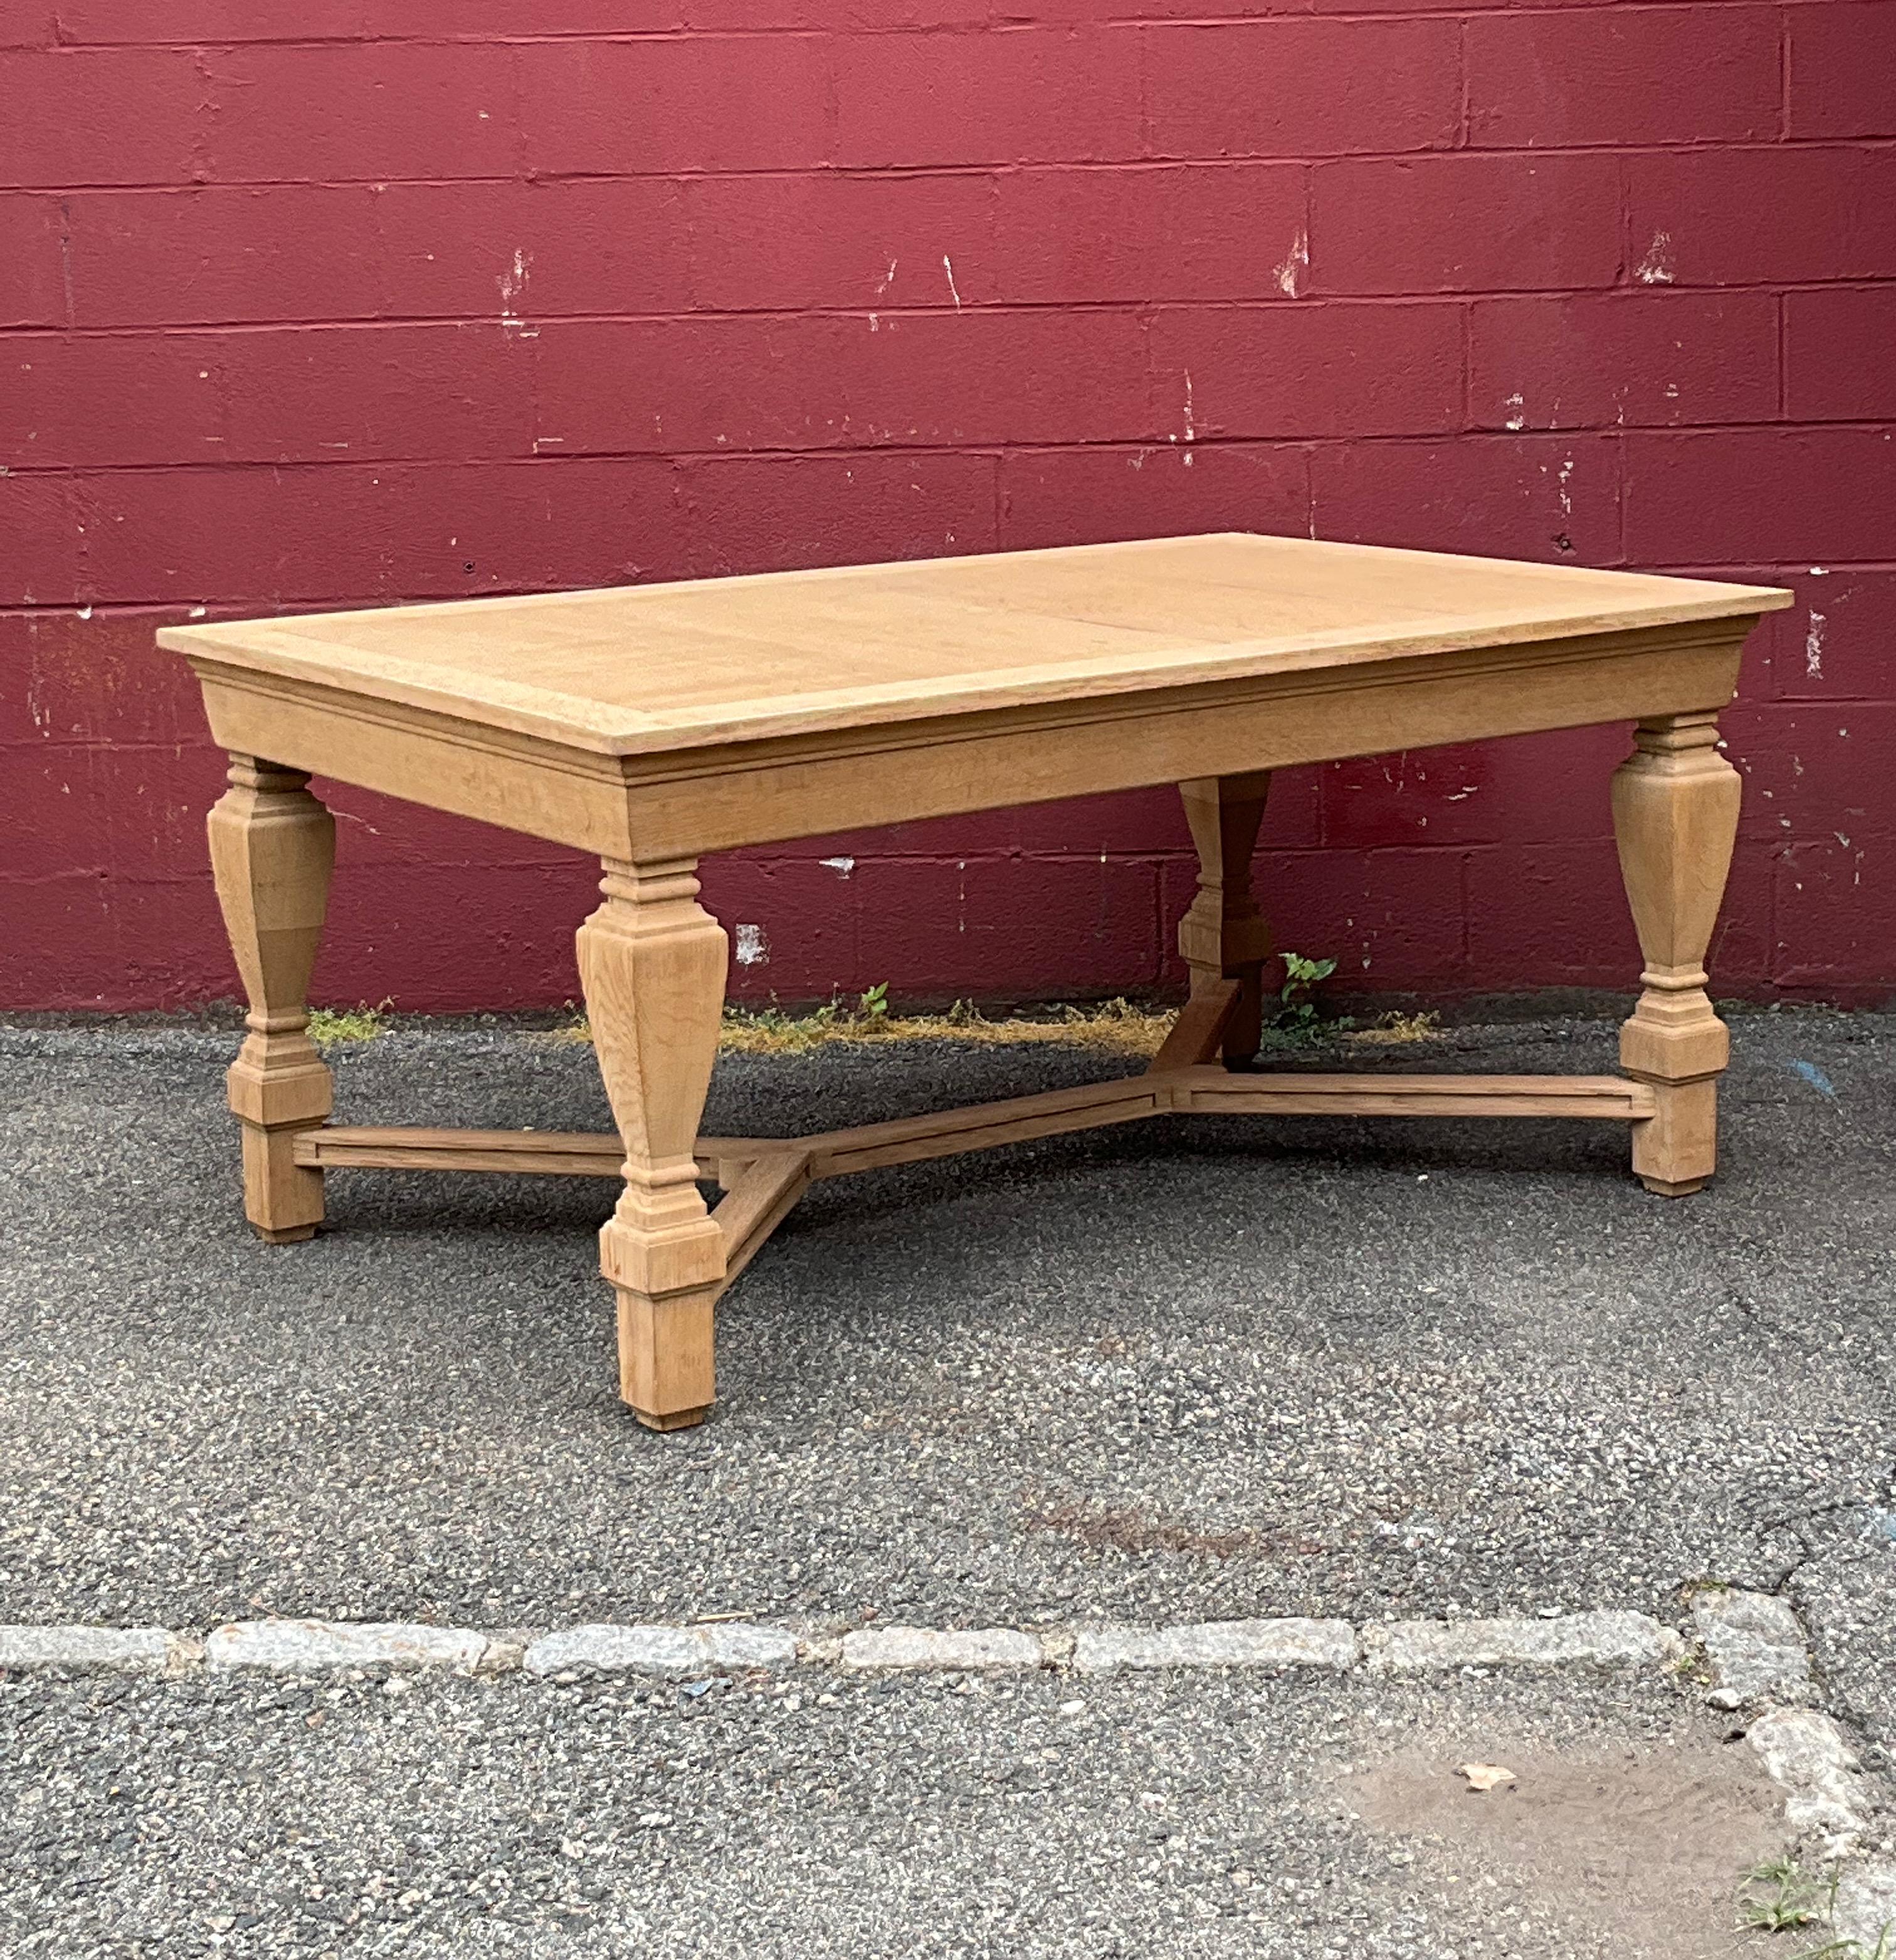 This extraordinary French 1940s oak library table features impeccable craftsmanship from the inset top to the sculptural legs and X shaped stretcher. The table has recently been stripped and bleached and it can be used as is or it can be waxed to